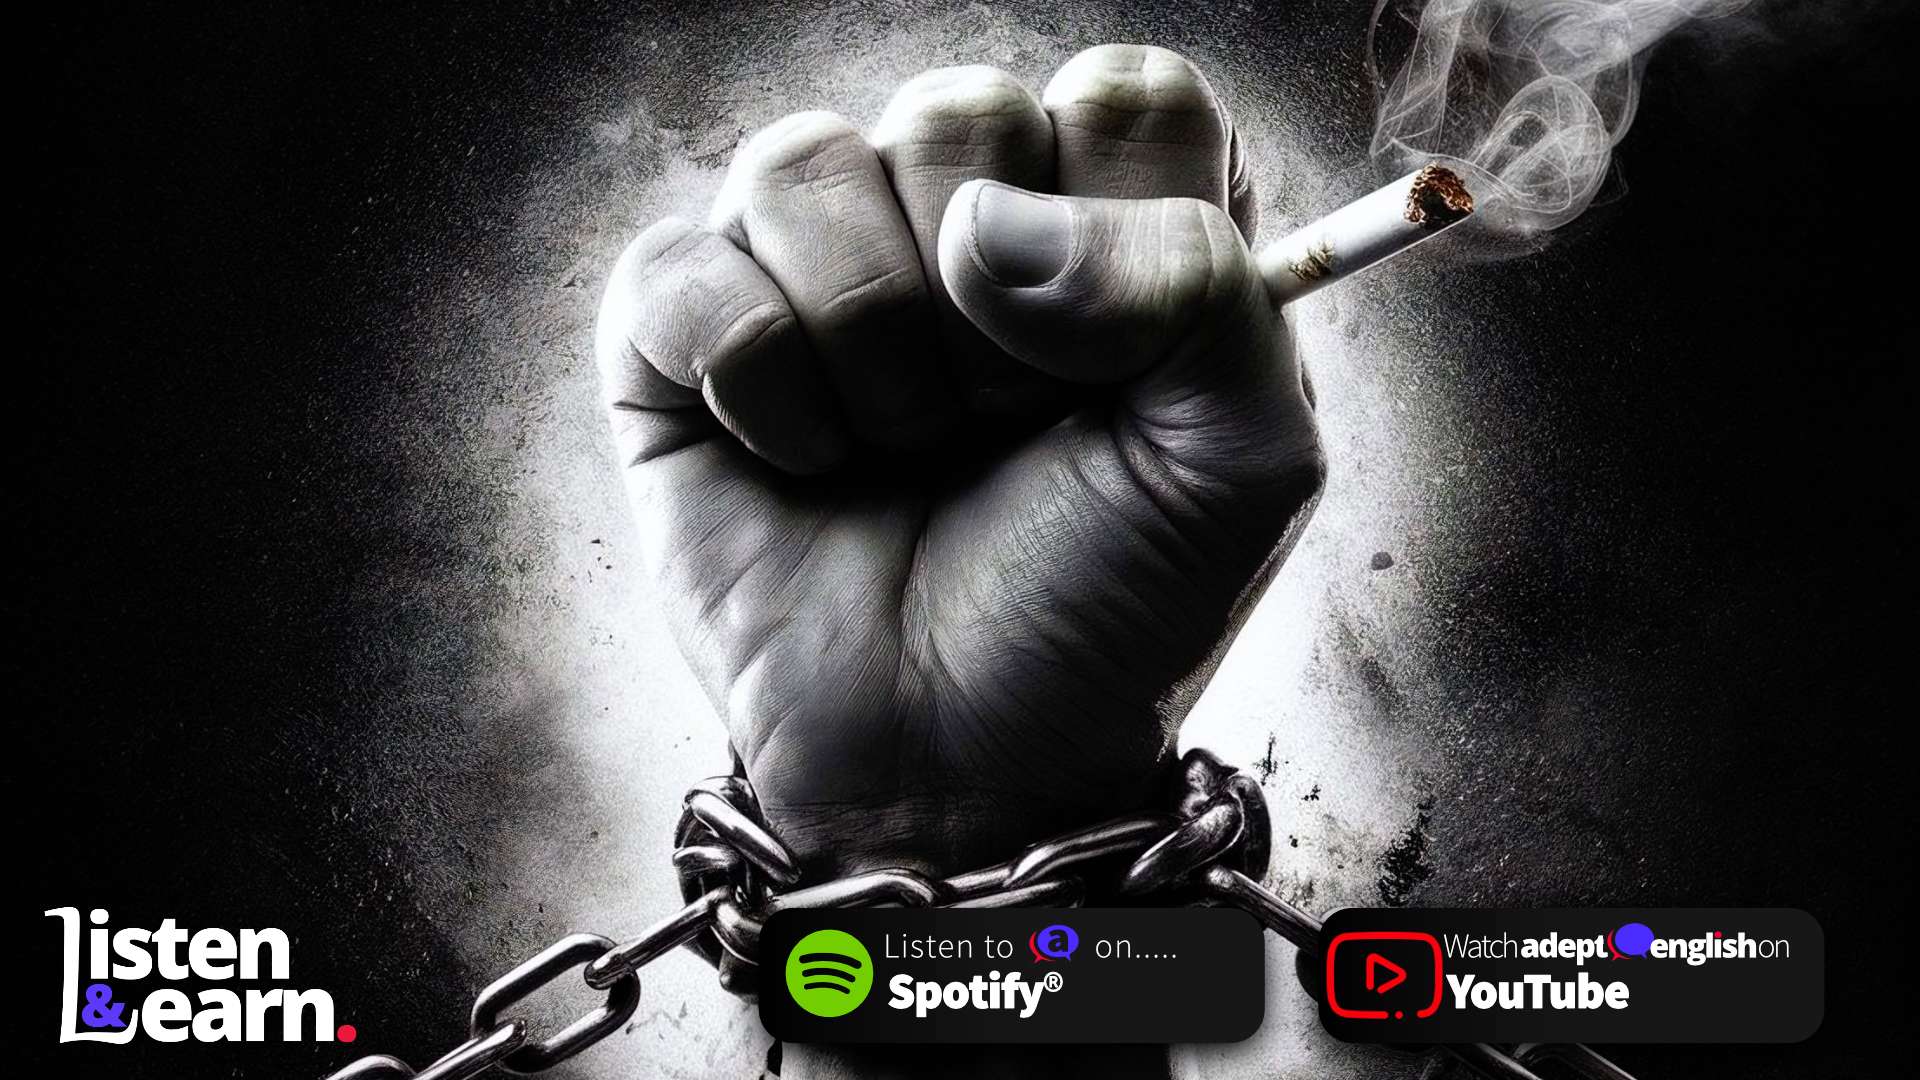 A dark coloured image of a fist gripping a smoking cigarette, the forearm is held with chains. British Culture and English: Listen to Our Podcast.